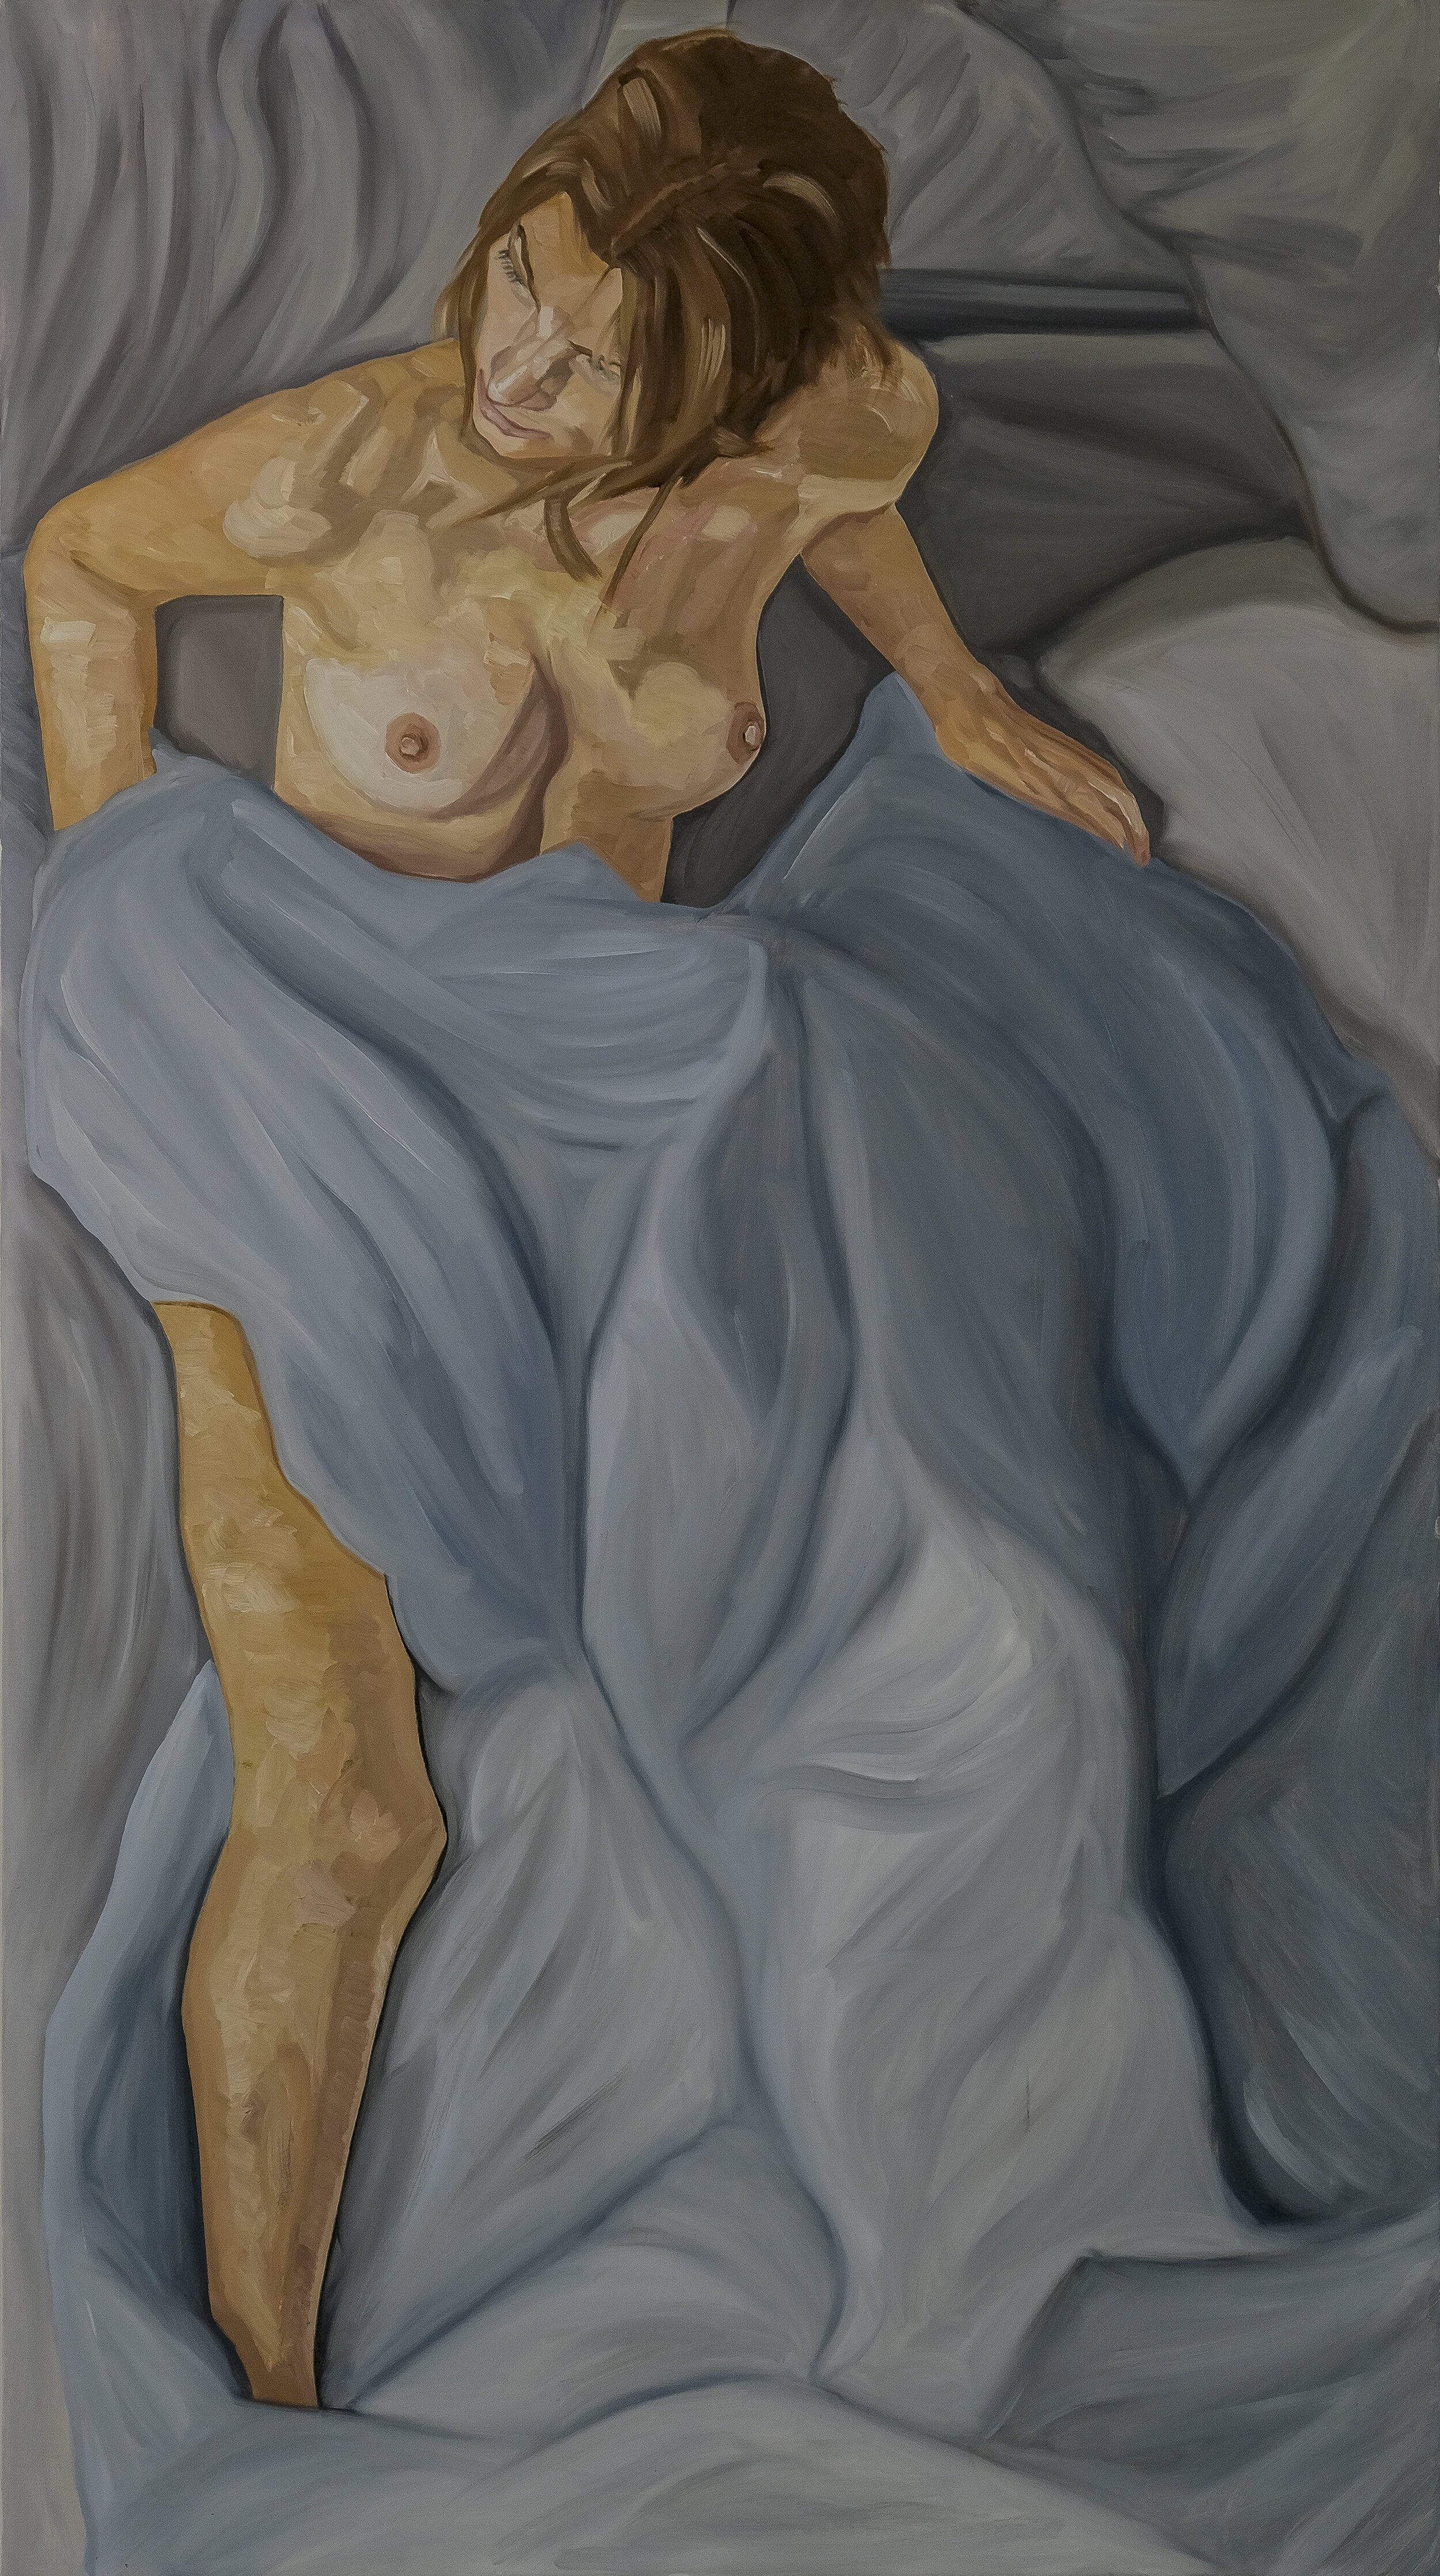   May in Bed   2021  Oil on canvas  100cm x 180cm 